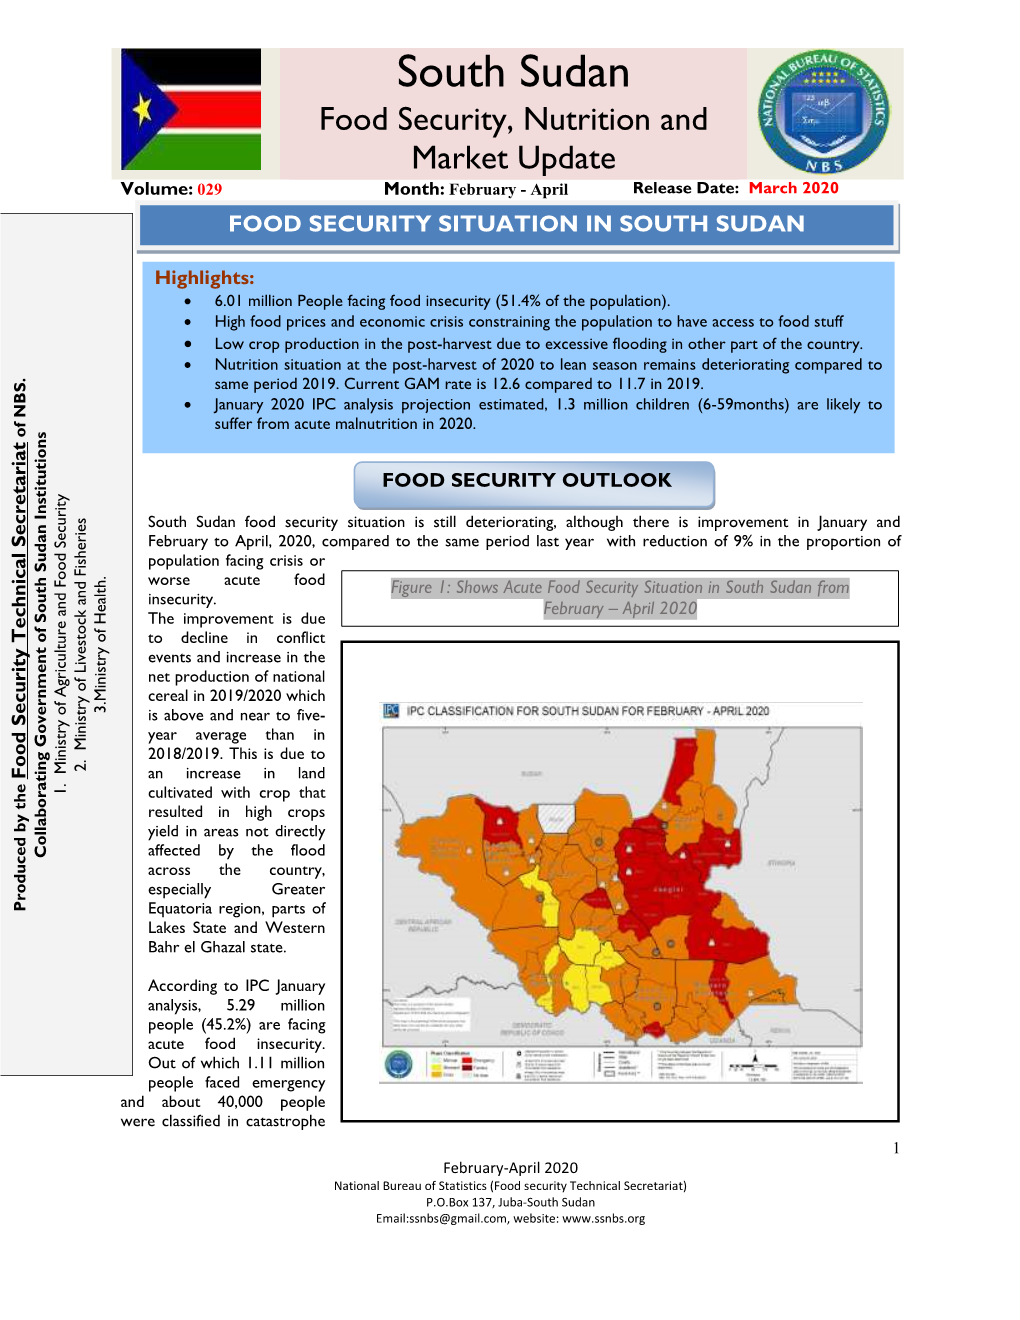 South Sudan Food Security, Nutrition And